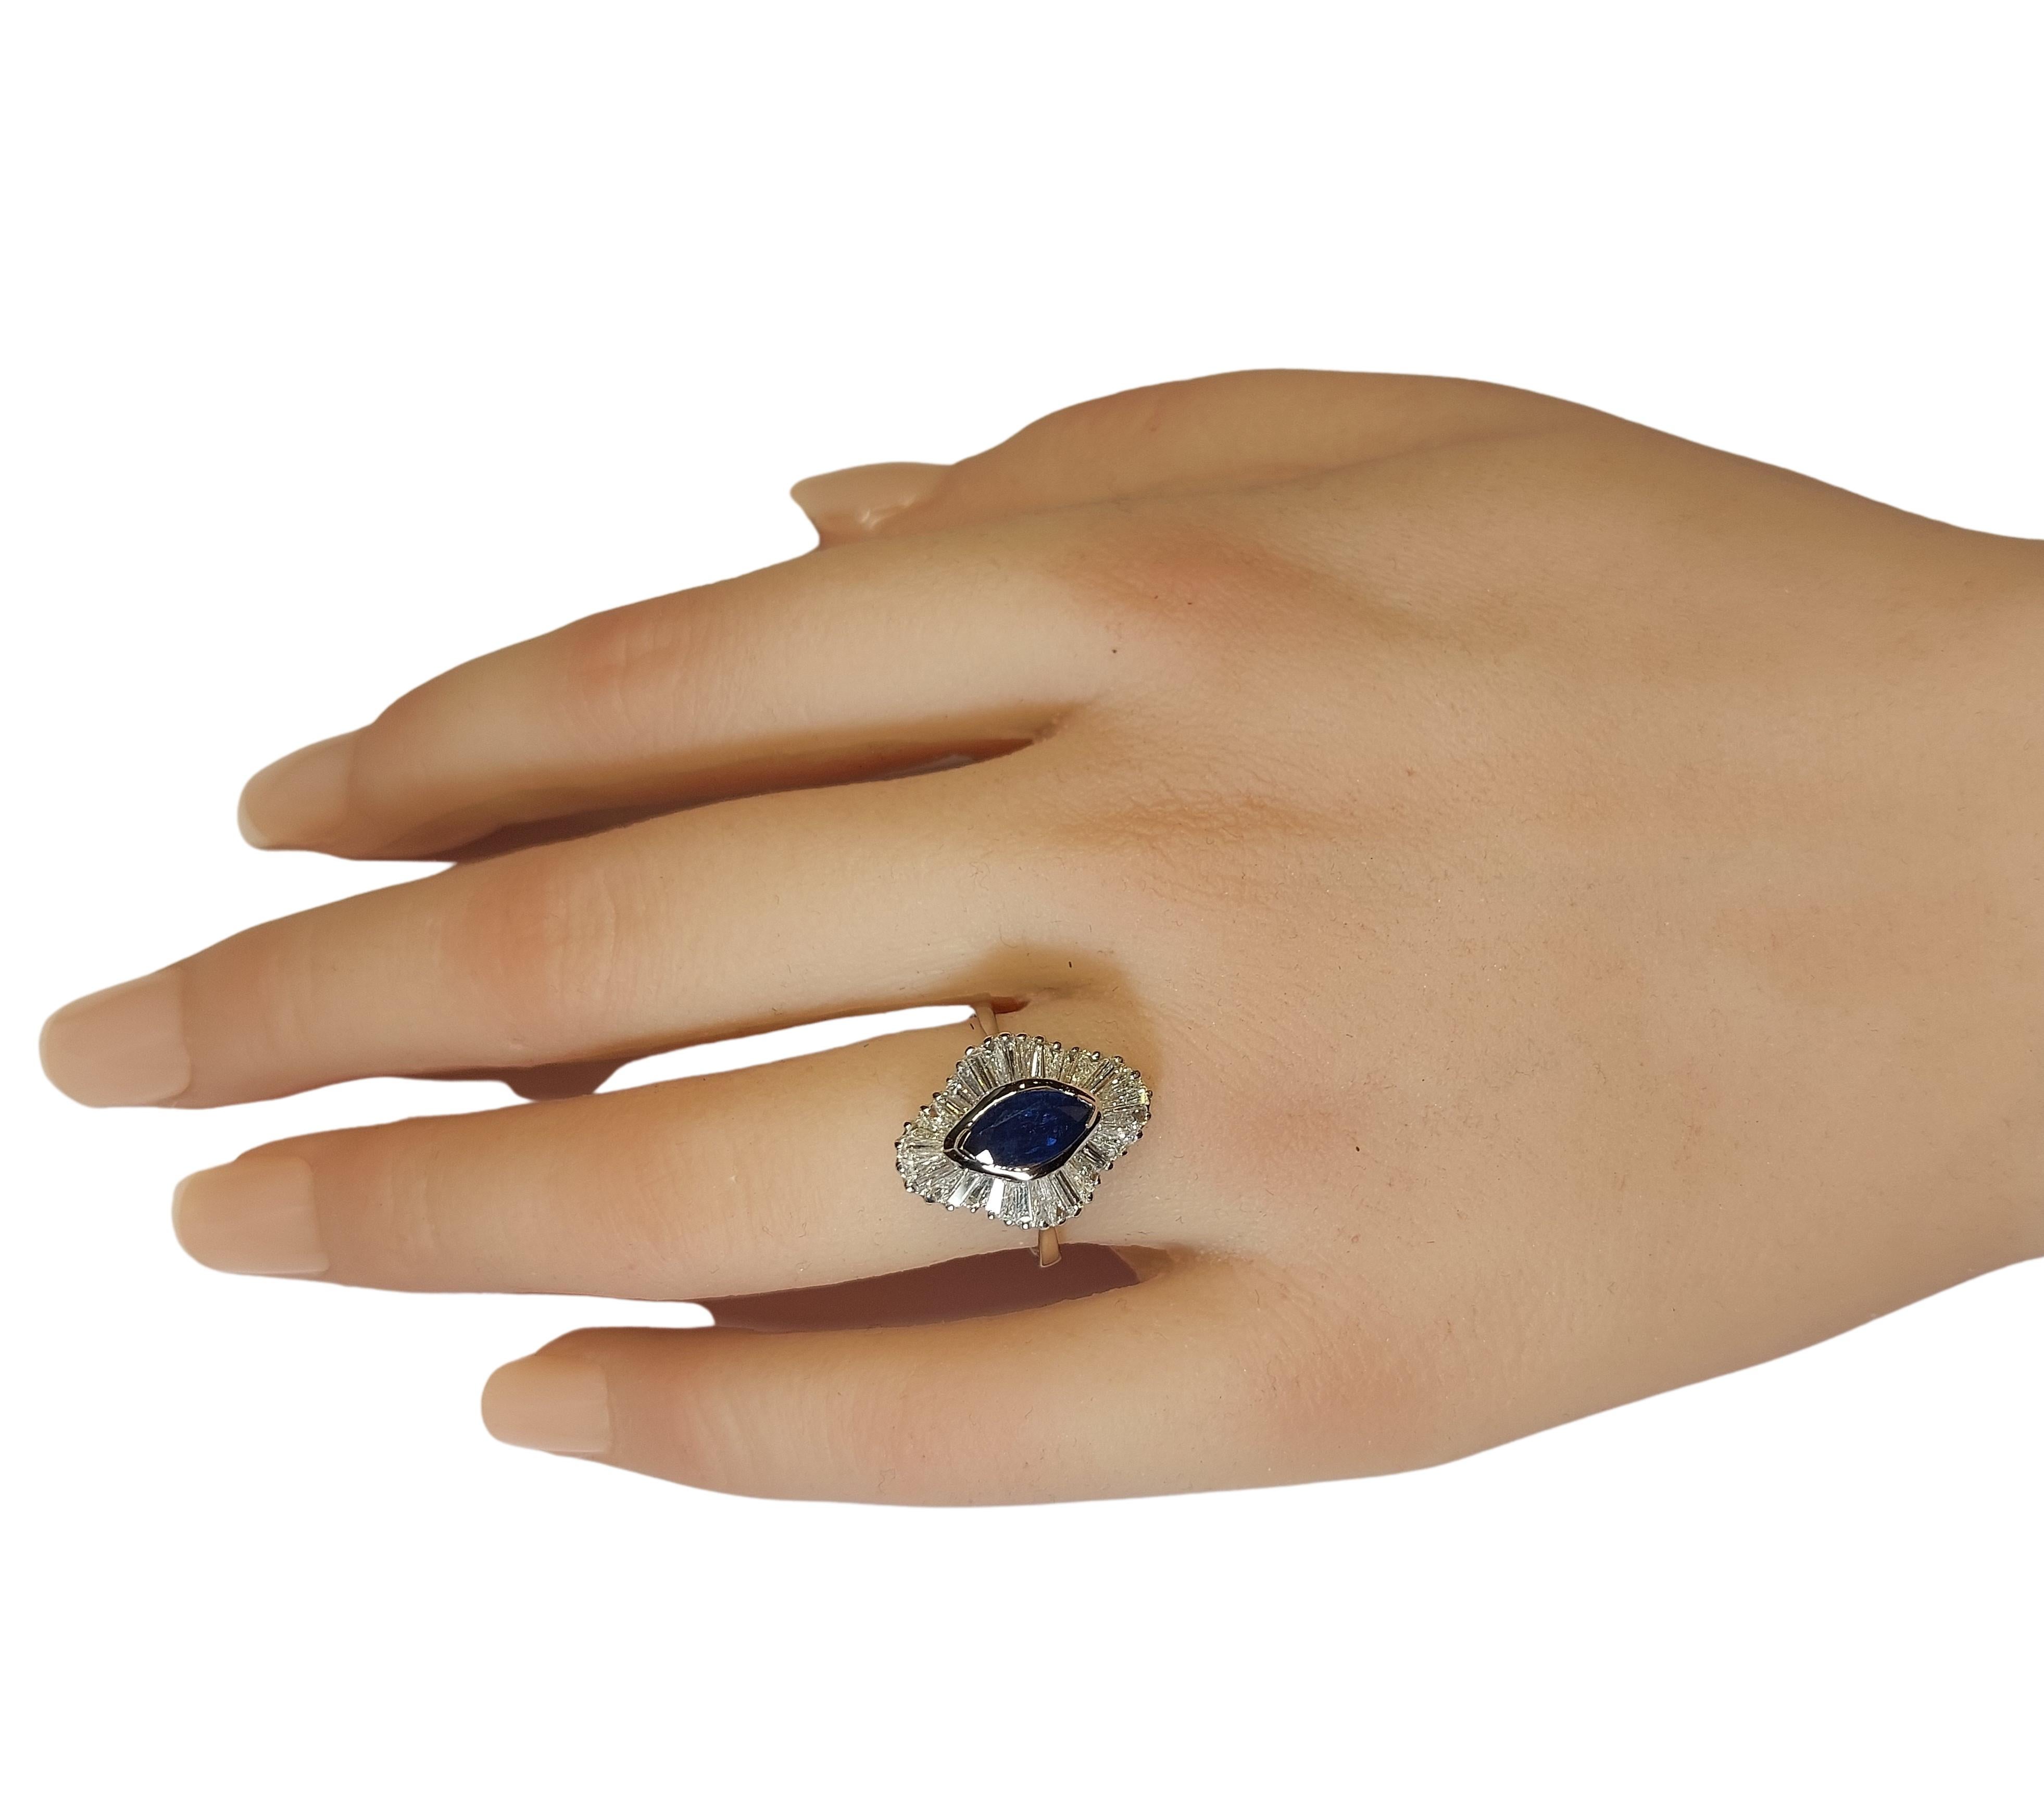 18kt White Gold Ring with 1.02ct Marquise Cut Sapphire and 2.4ct Diamonds For Sale 8